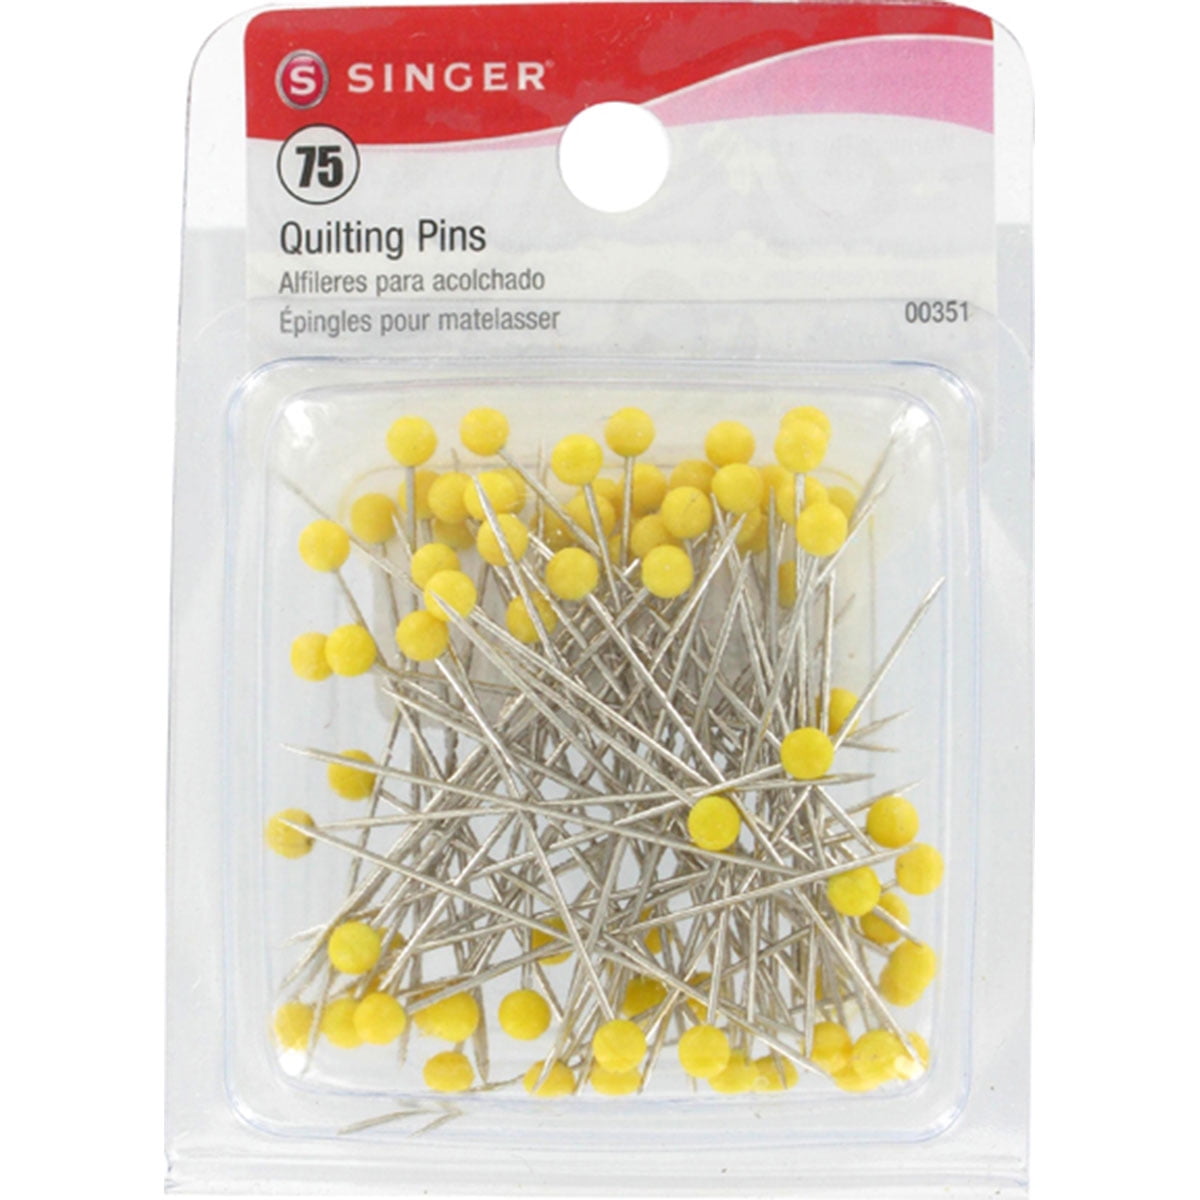 Singer Quilting Pins in Flower Box 175-Count